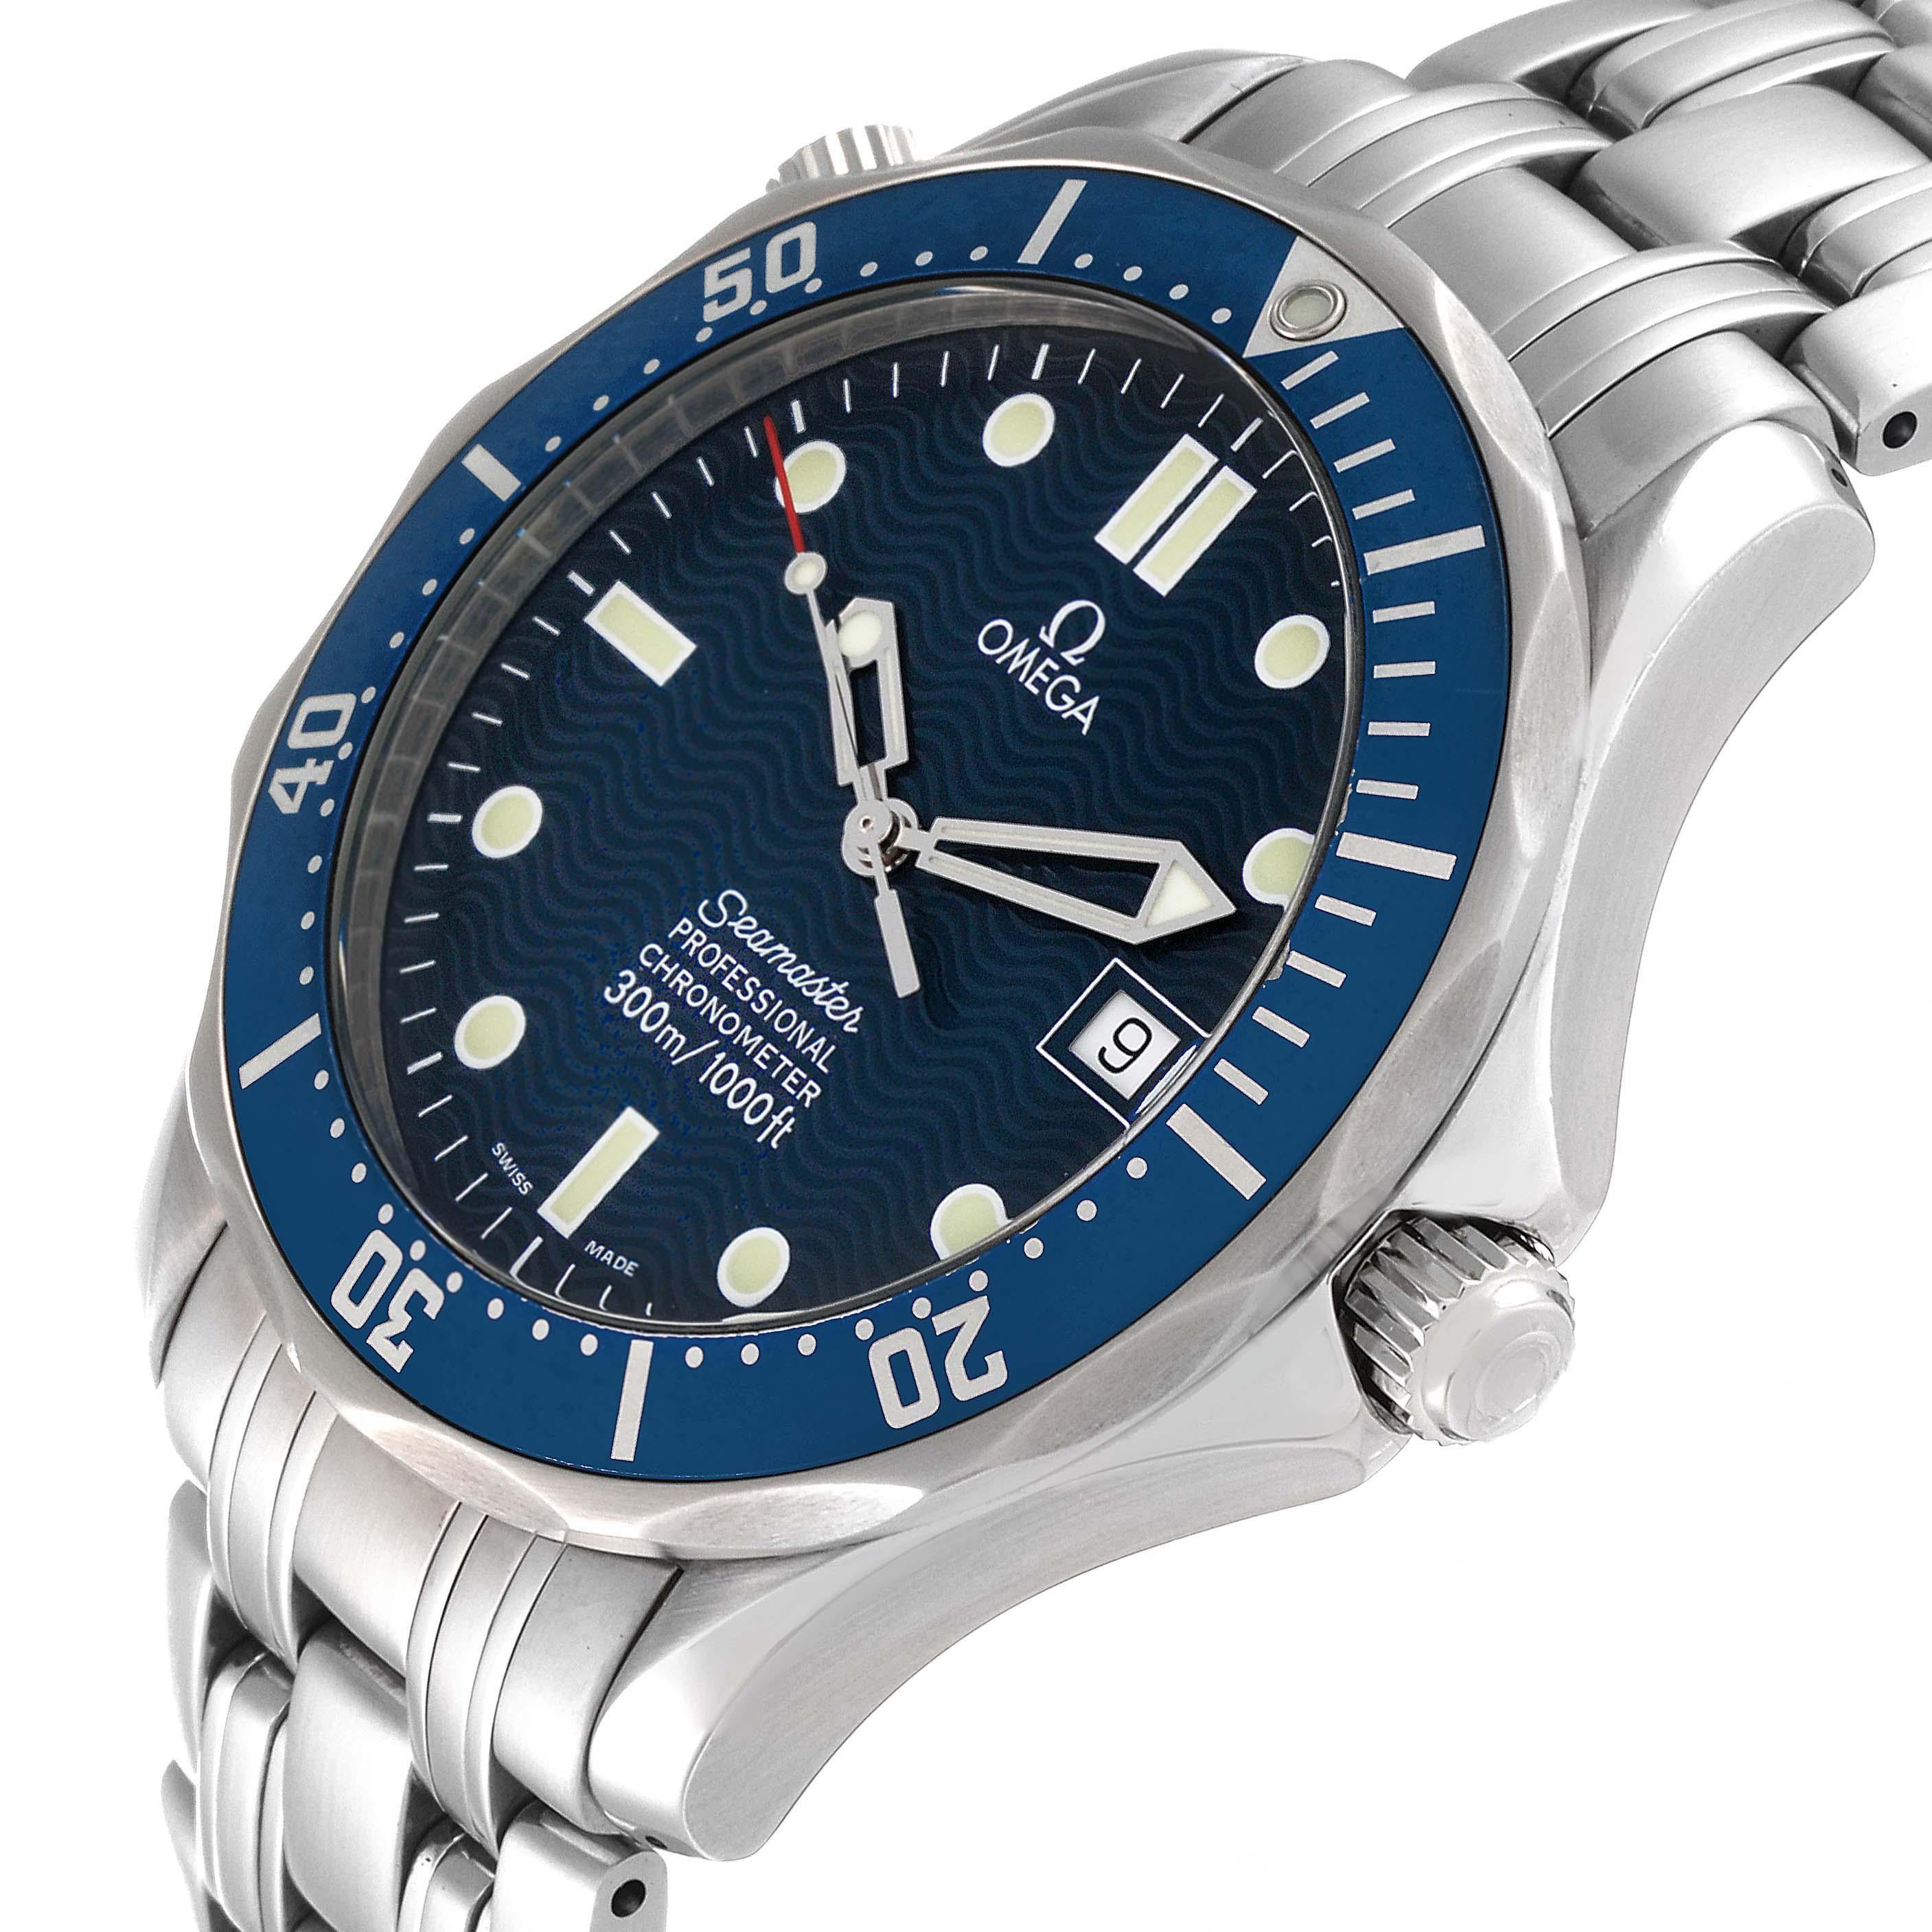 Omega Seamaster Diver 300mm Blue Dial Steel Mens Watch 2531.80.00. Automatic self-winding movement. Stainless steel case 41.0 mm in diameter. Omega logo on the crown. Helium escape valve at 10 o'clock. Blue unidirectional rotating bezel. Scratch